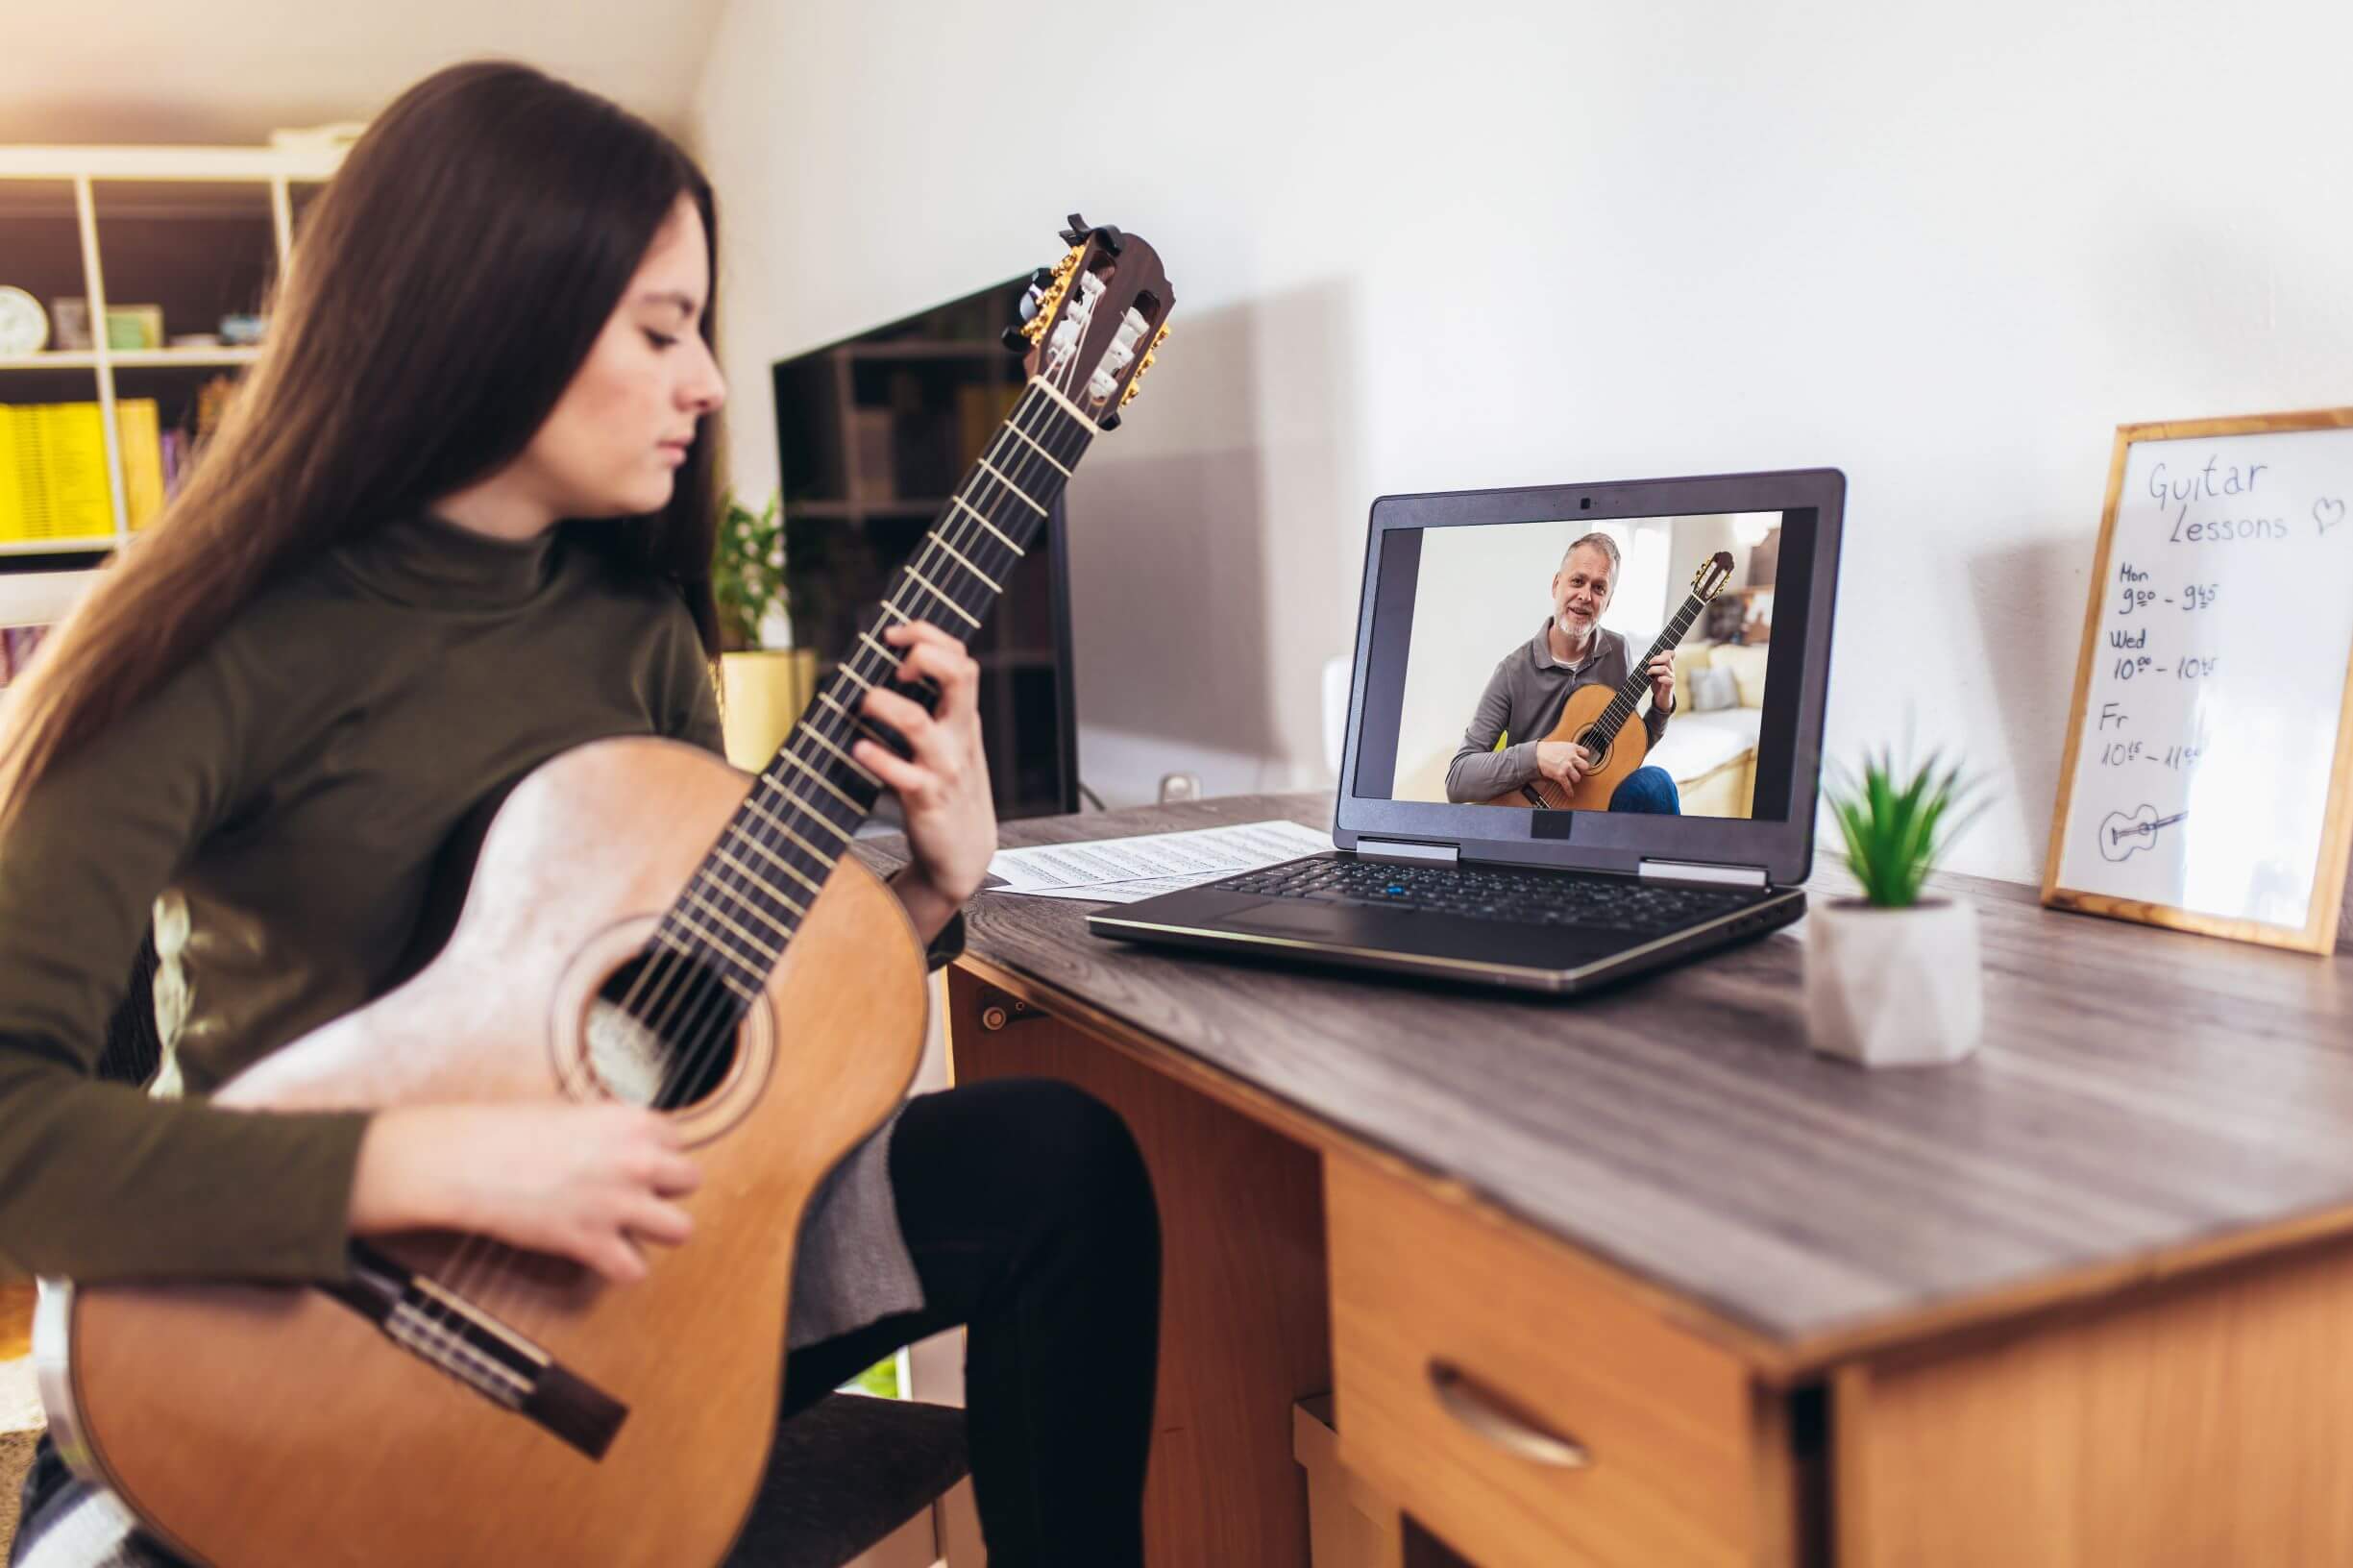 Image shows a girl learning guitar through a video.